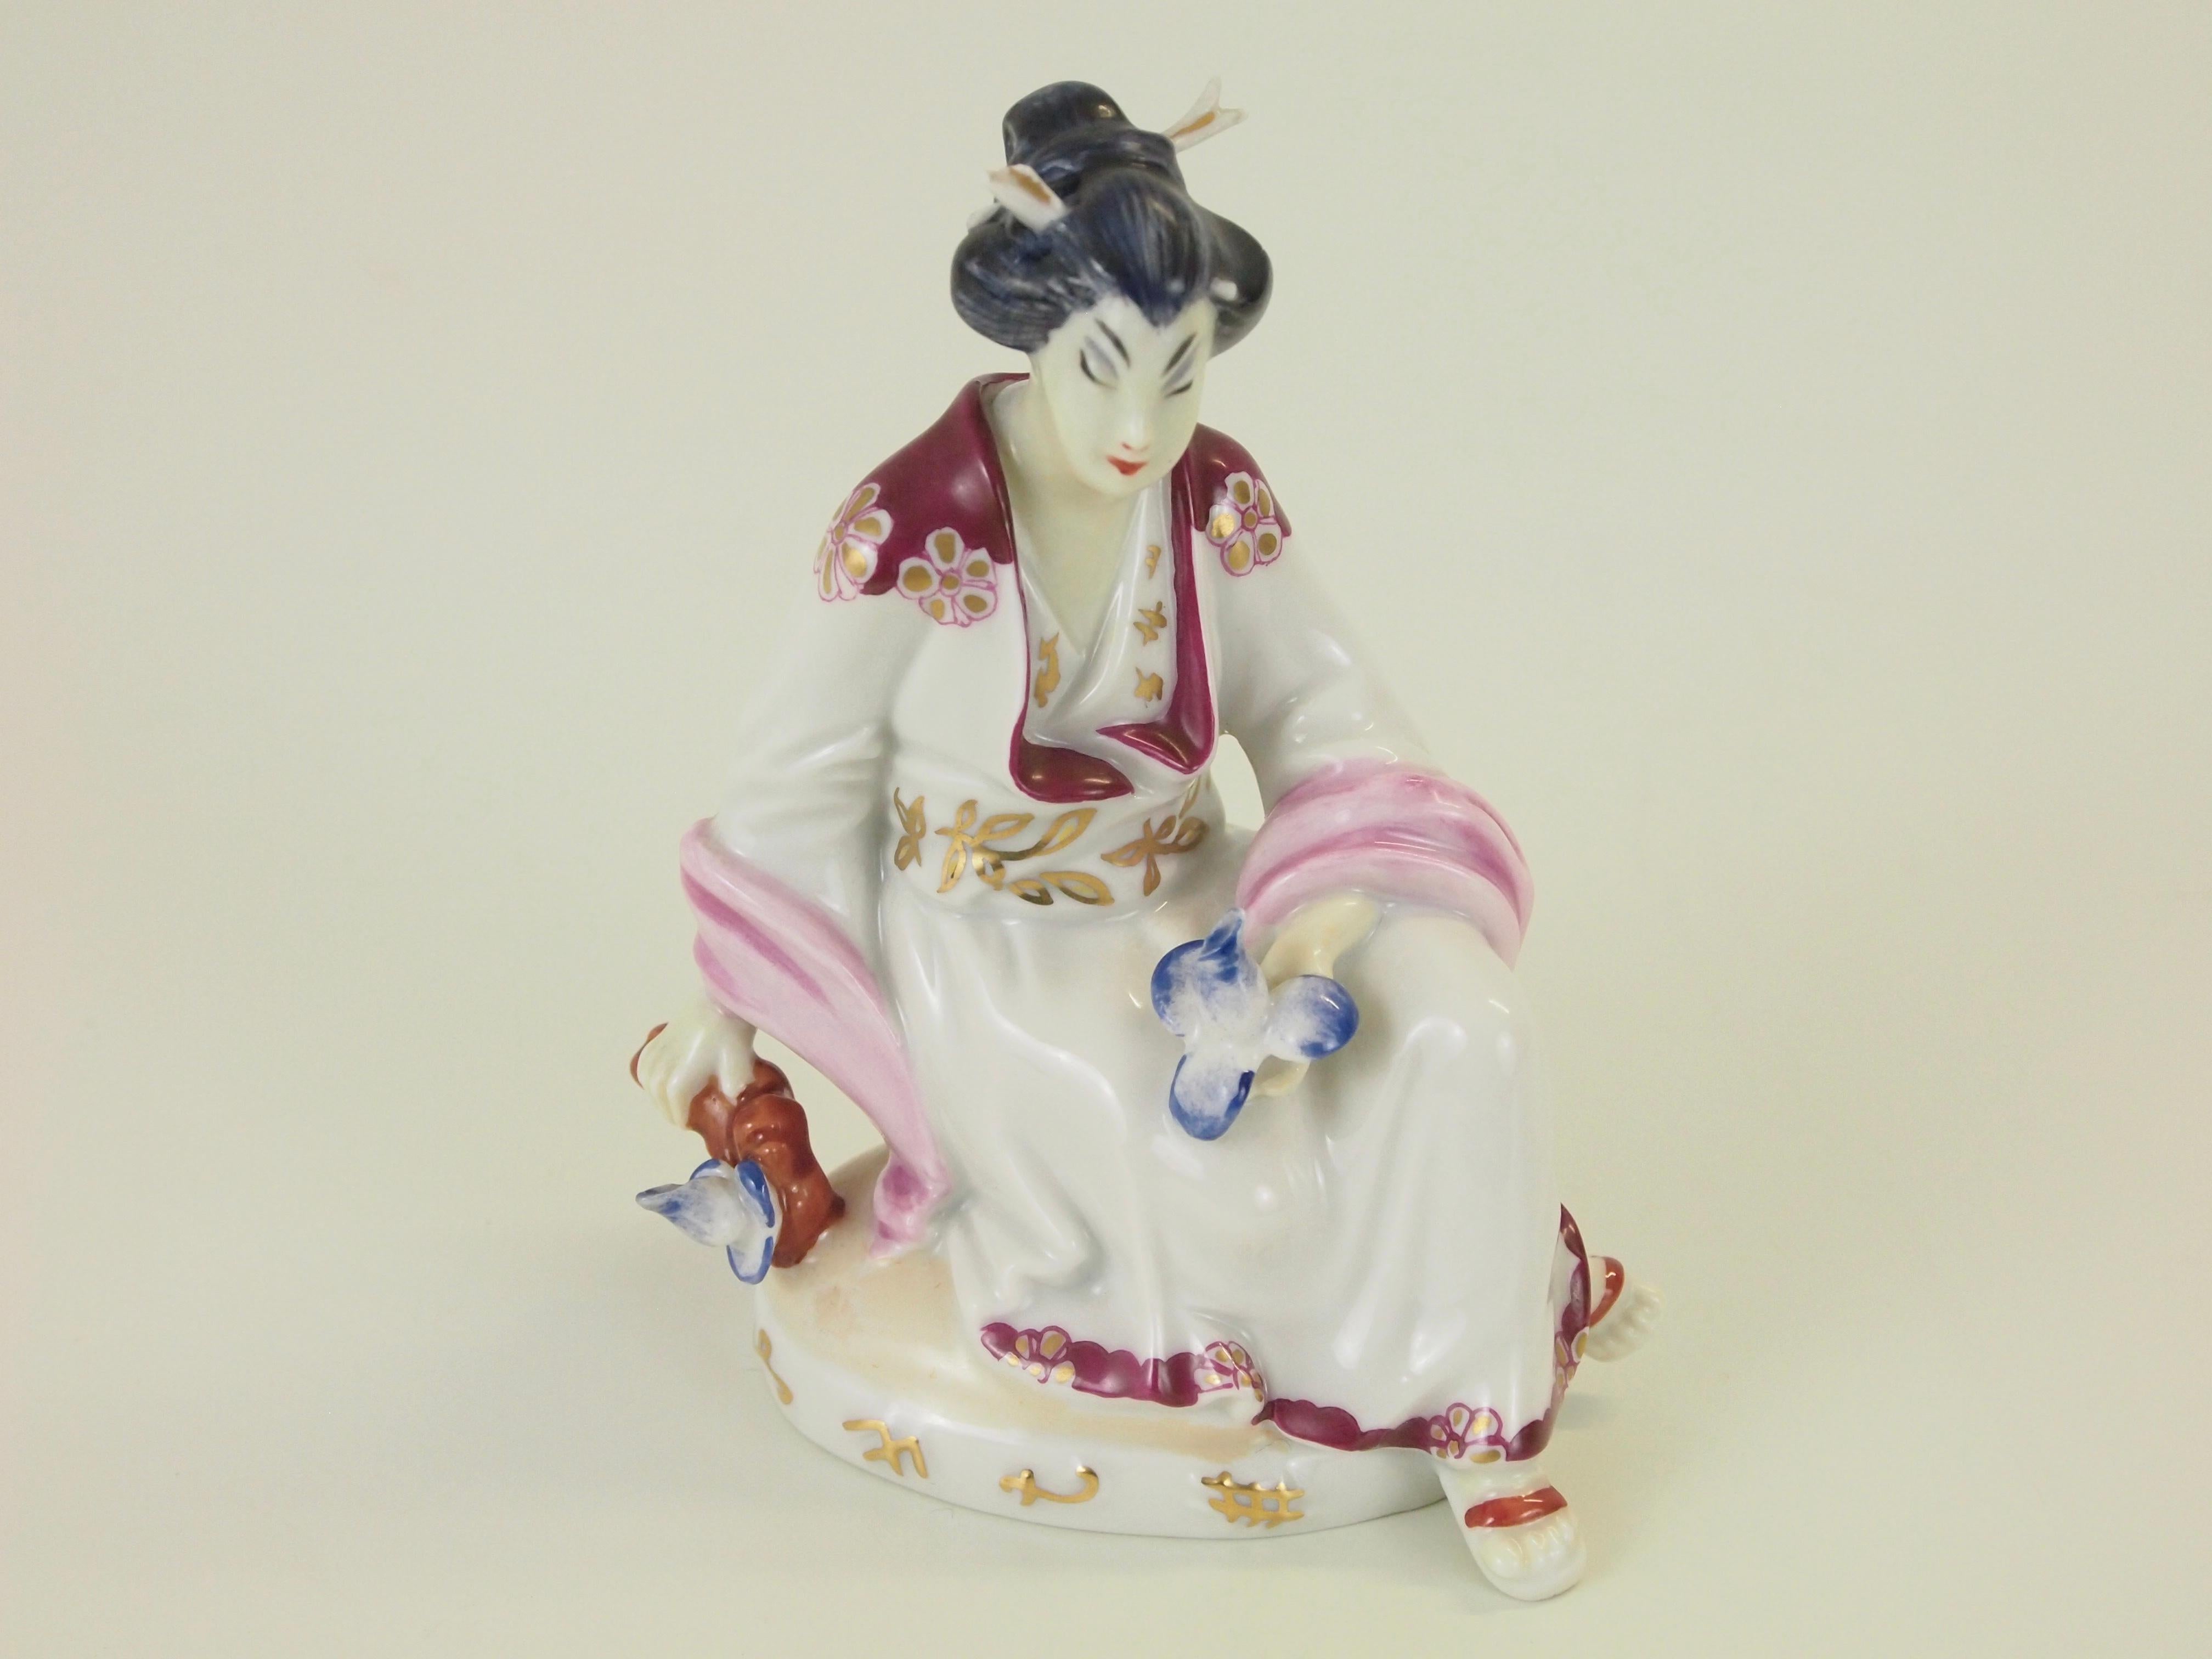 Augarten Wien Porcelain Figurine Depicting a Chinese Woman by Mathilde Jaksch In Distressed Condition For Sale In Hilversum, Noord Holland